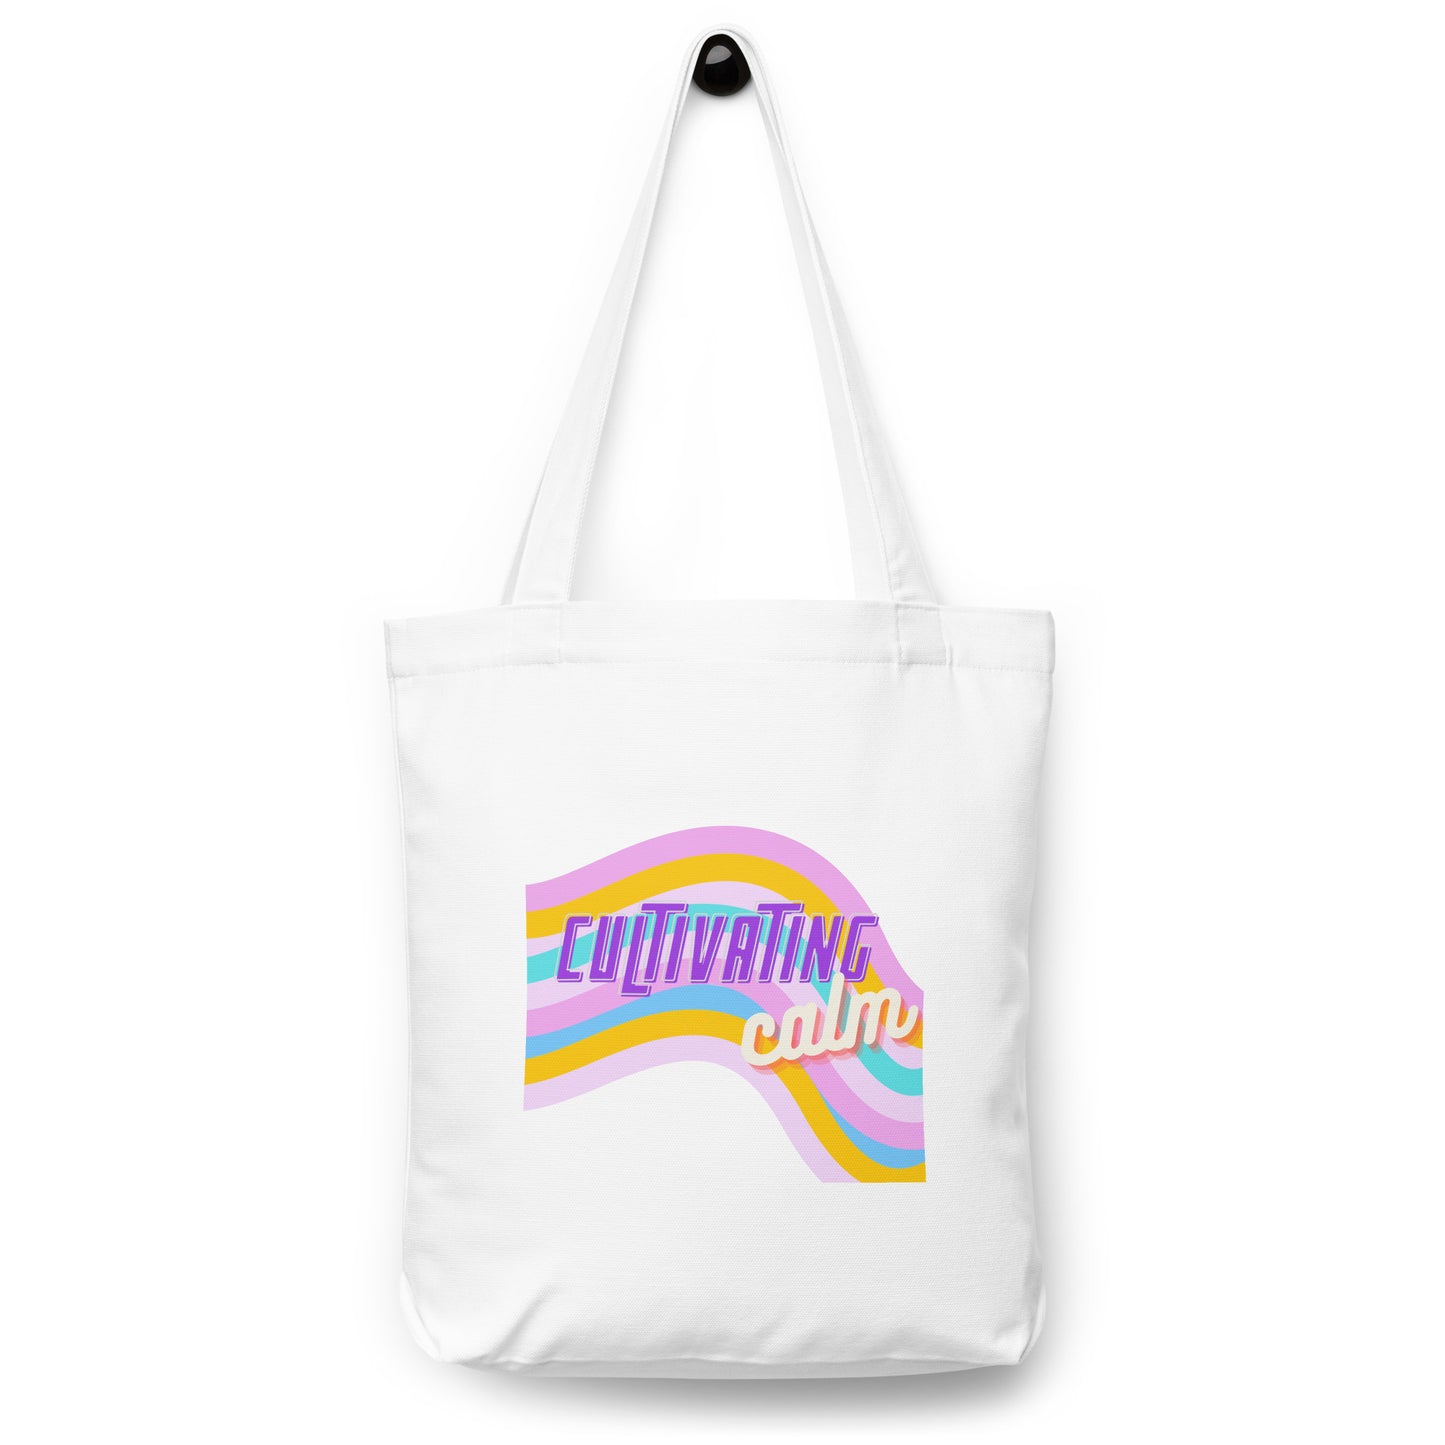 Cultivating Calm Cotton tote bag